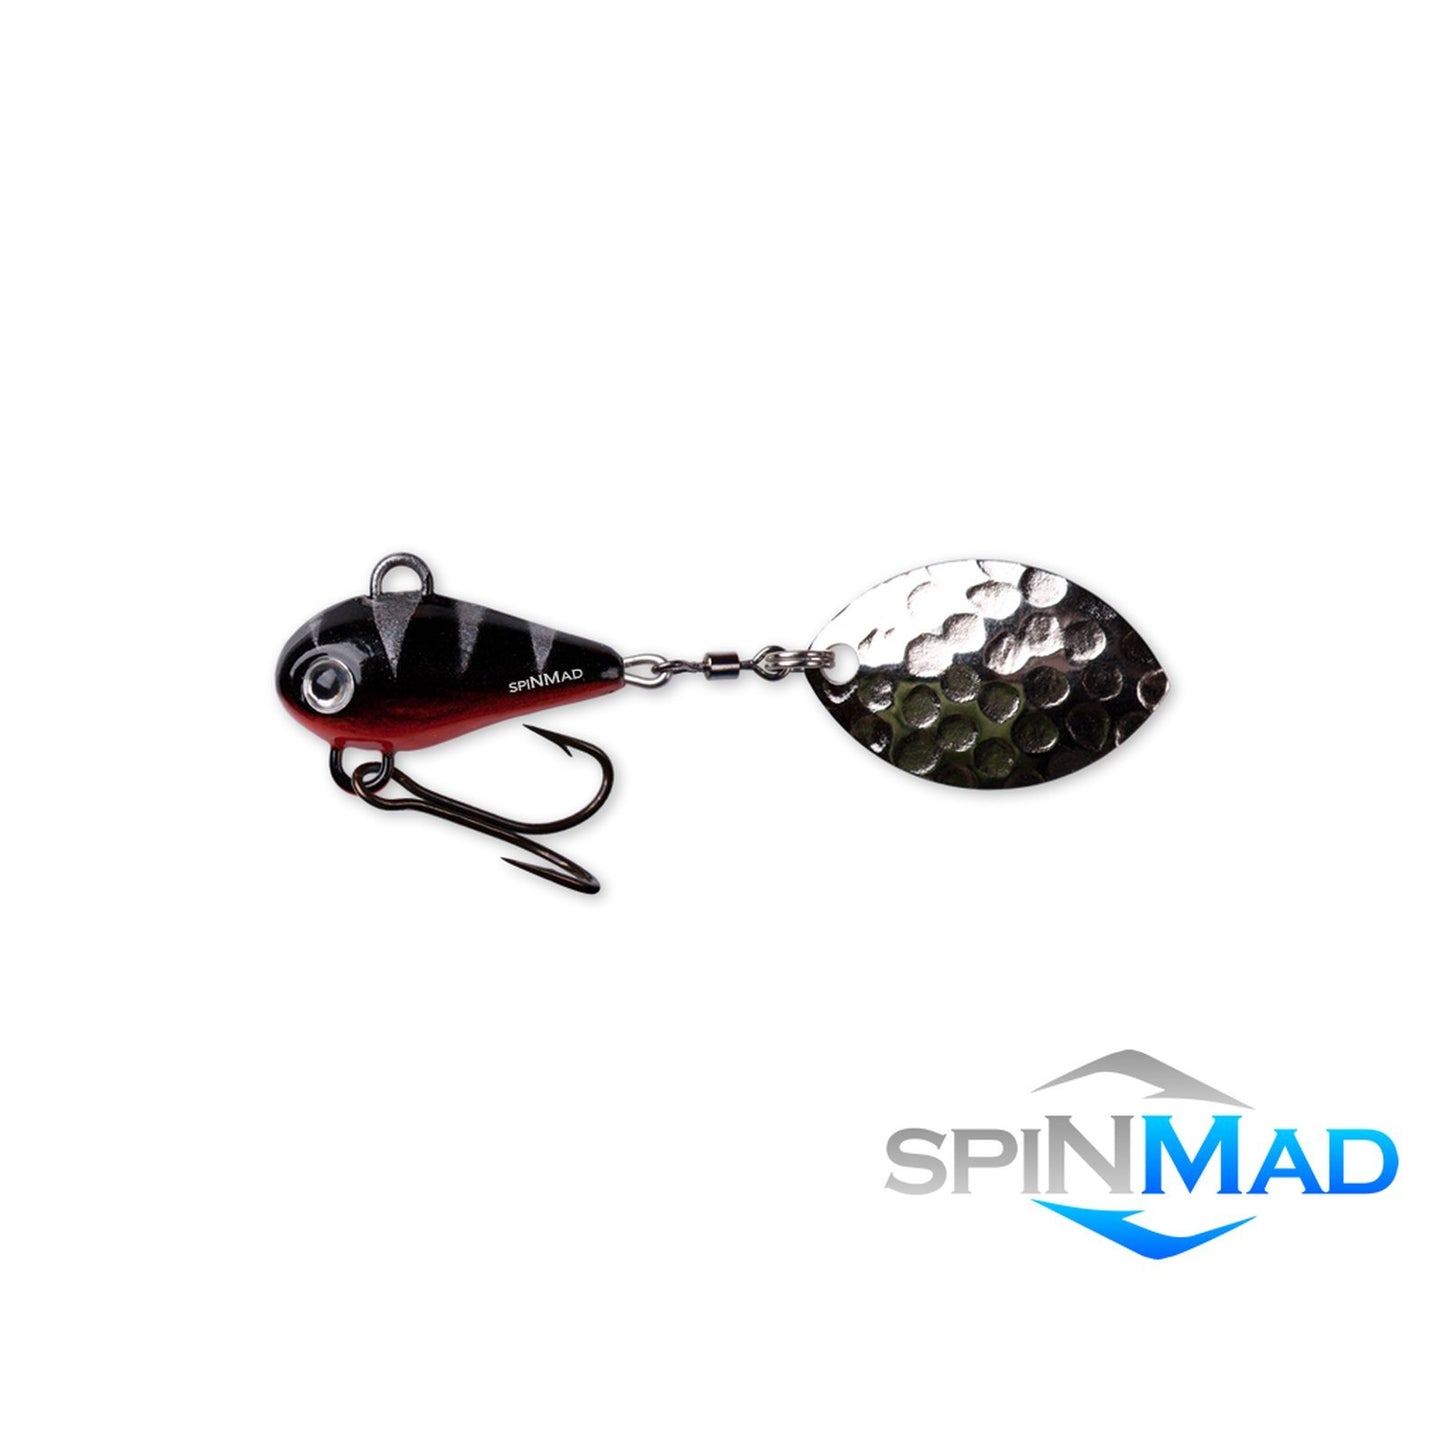 SpinMad MAG 6 0709